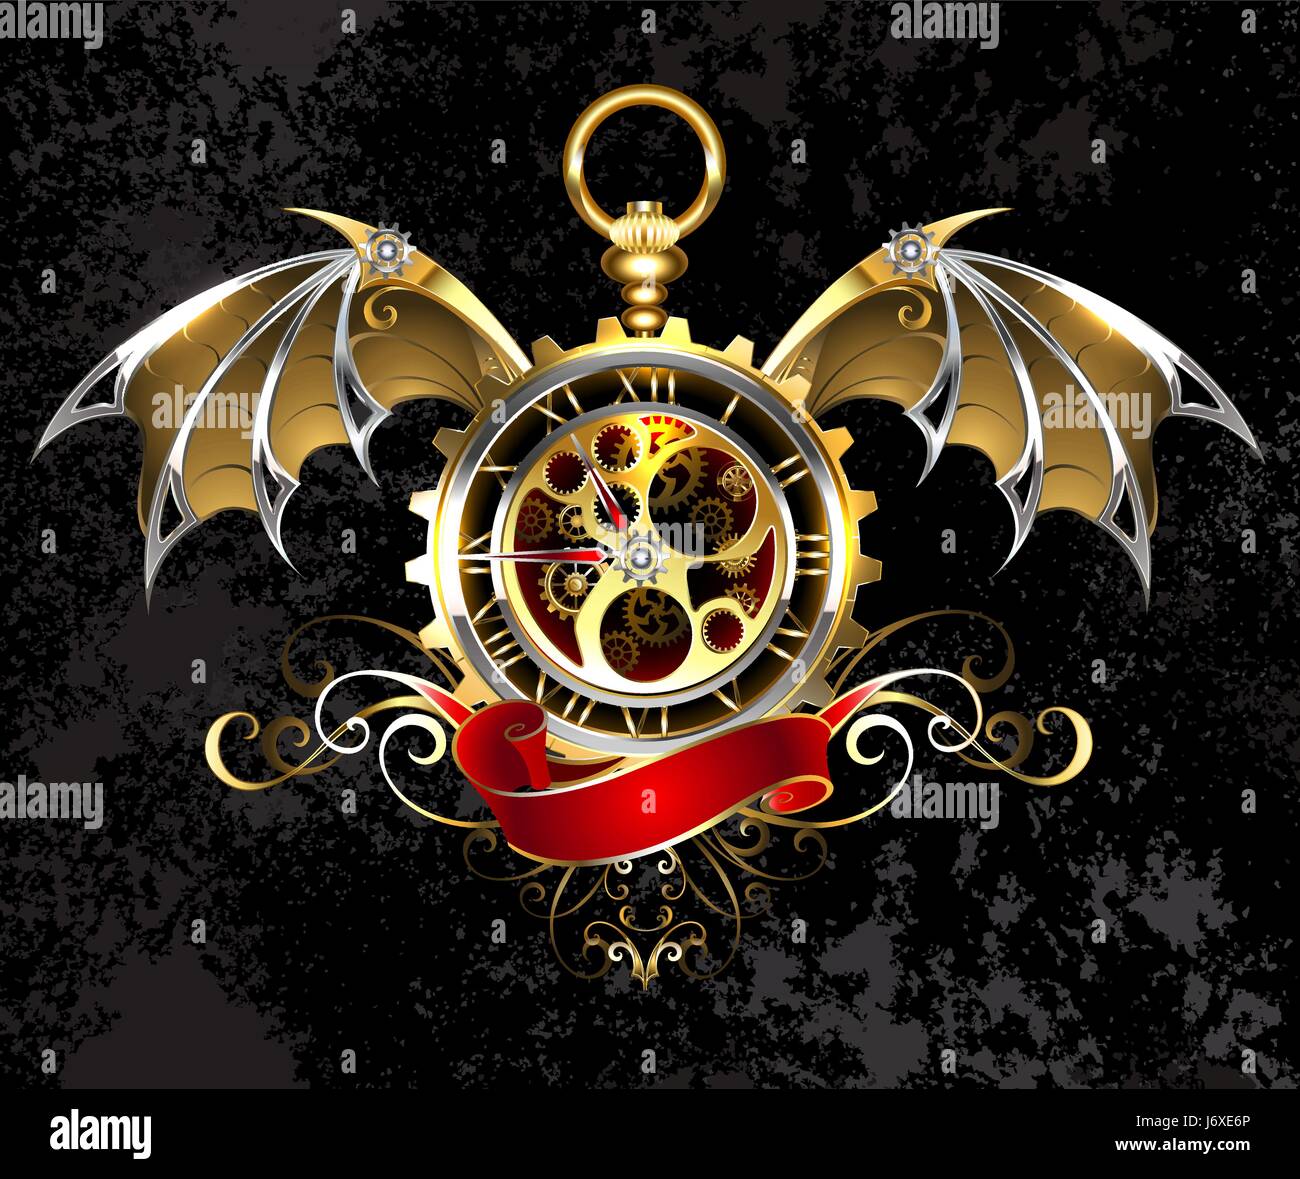 Gold, antique watches with mechanical, gold dragon wings, decorated with a bronze pattern and a red ribbon. Gold Antique Watches. Steampunk style. Stock Vector